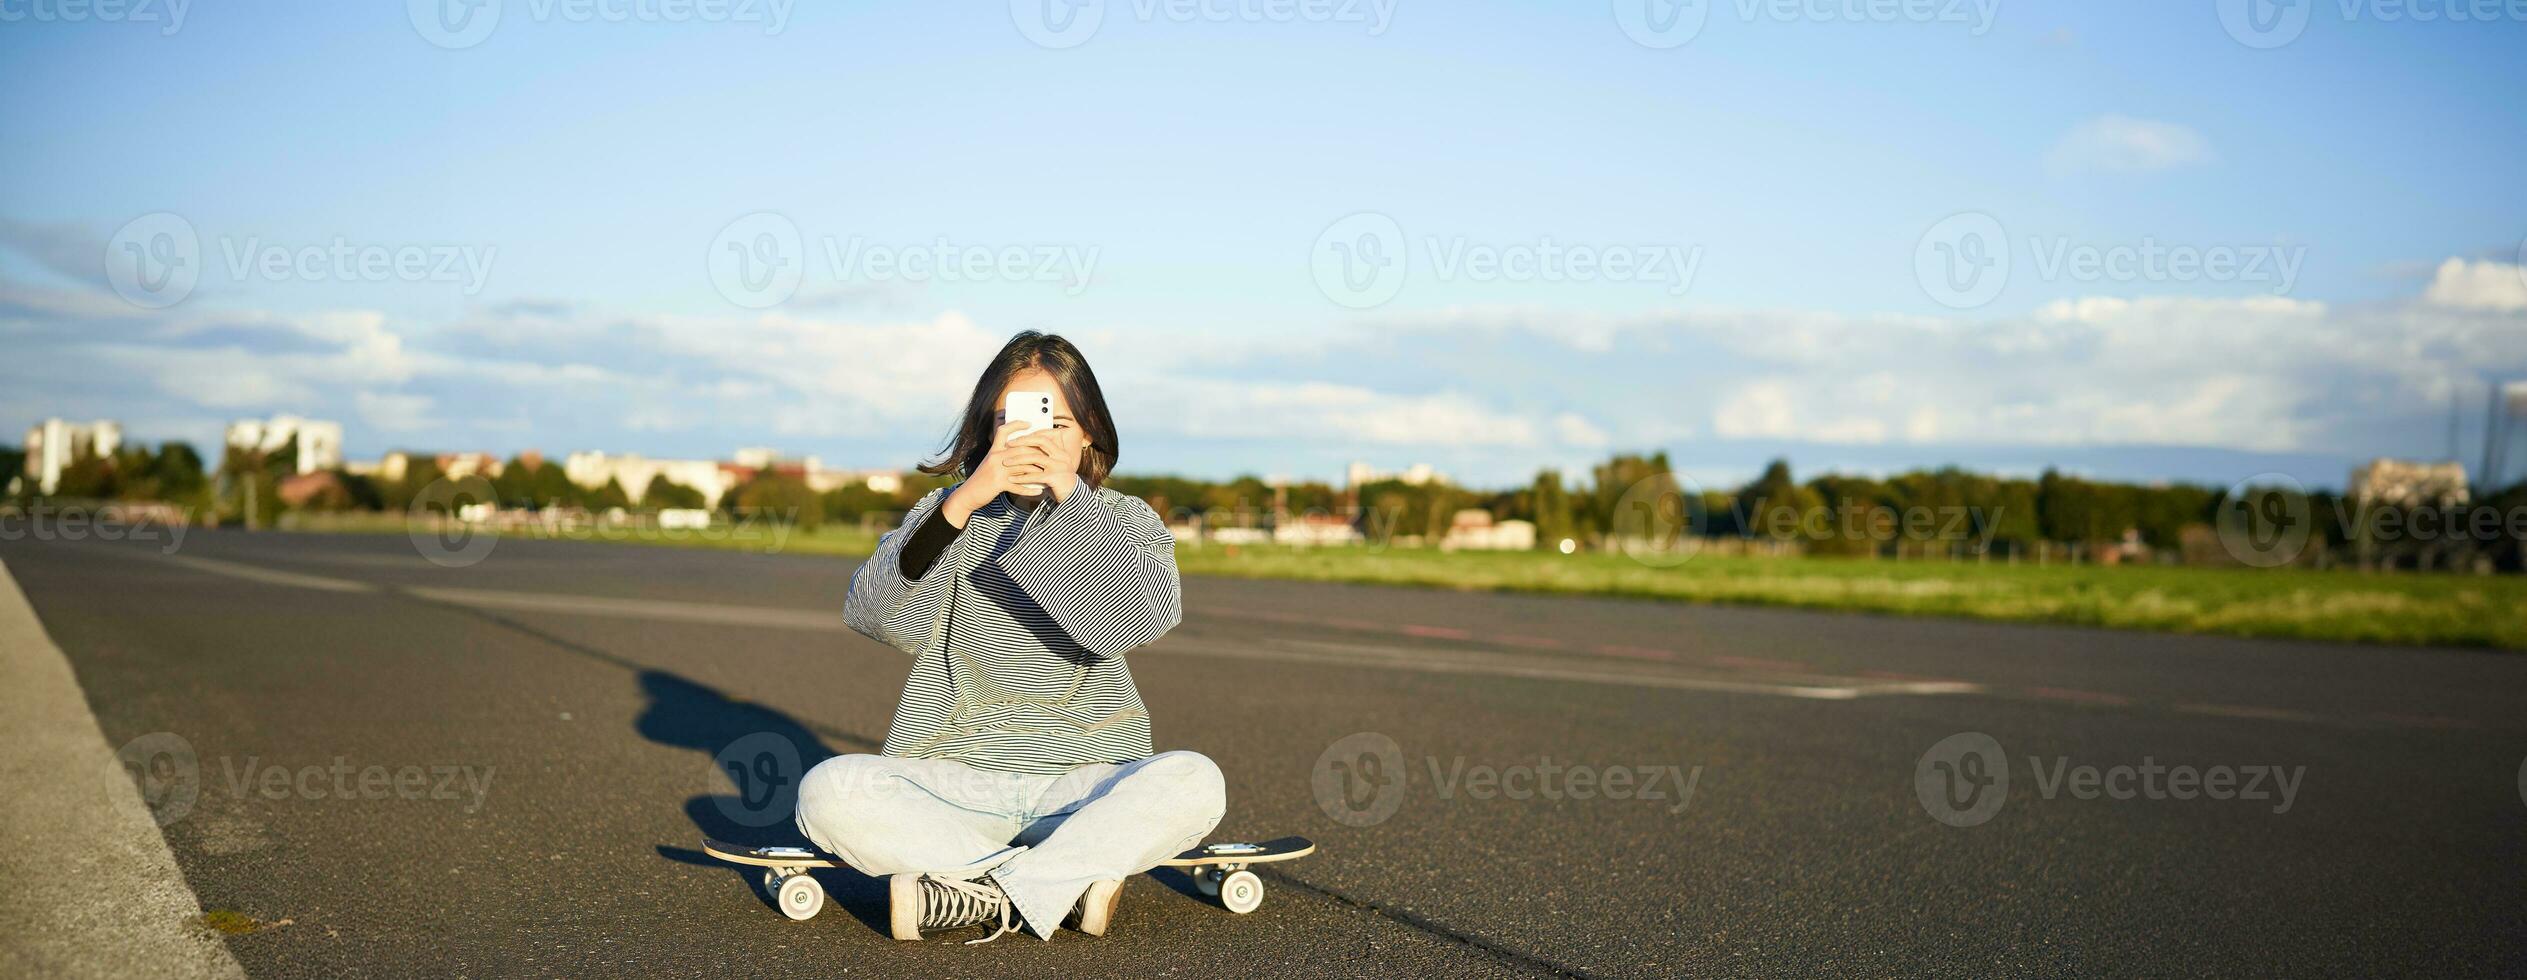 Hipster teen girl sitting on her skateboard, taking photos on smartphone. Asian woman skater sits on longboard and photographing on mobile phone